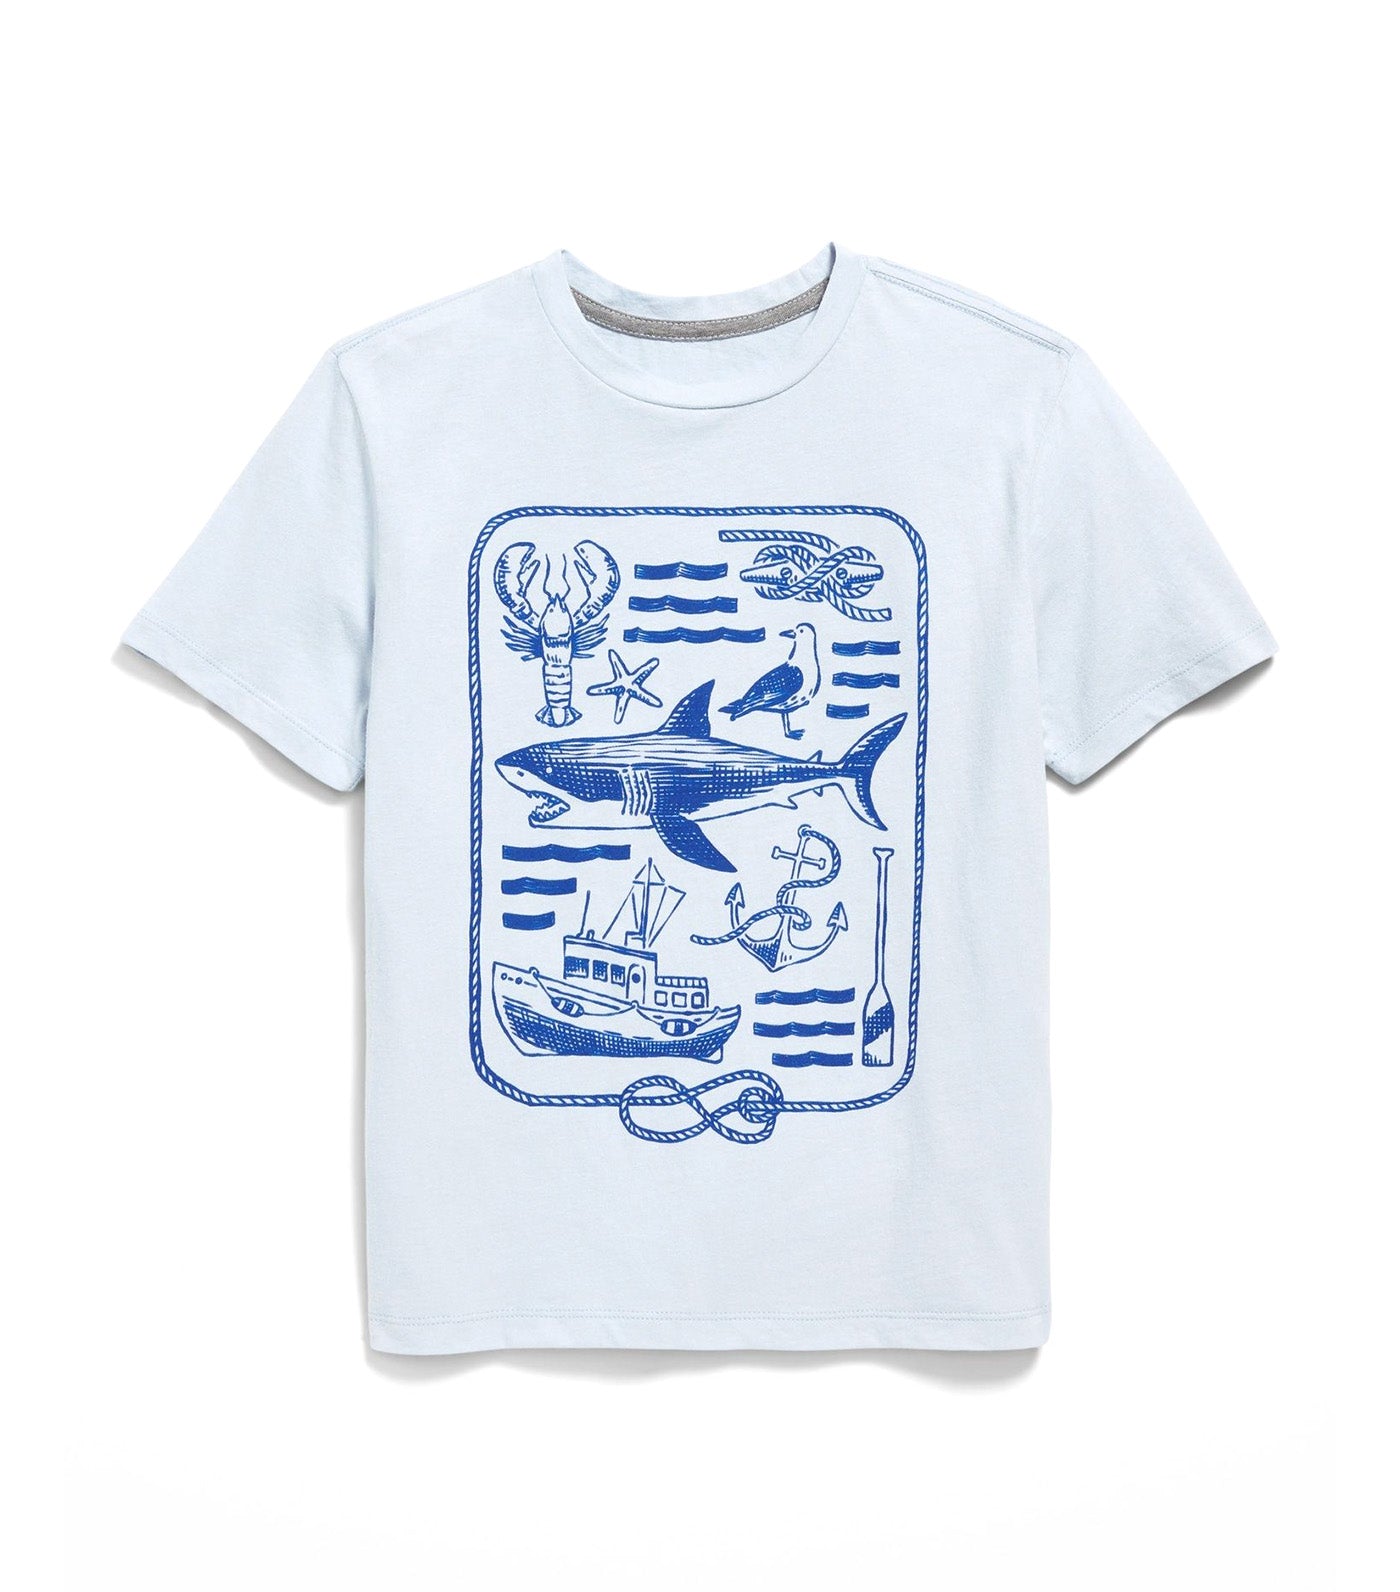 Short-Sleeve Graphic T-Shirt for Boys Microchip